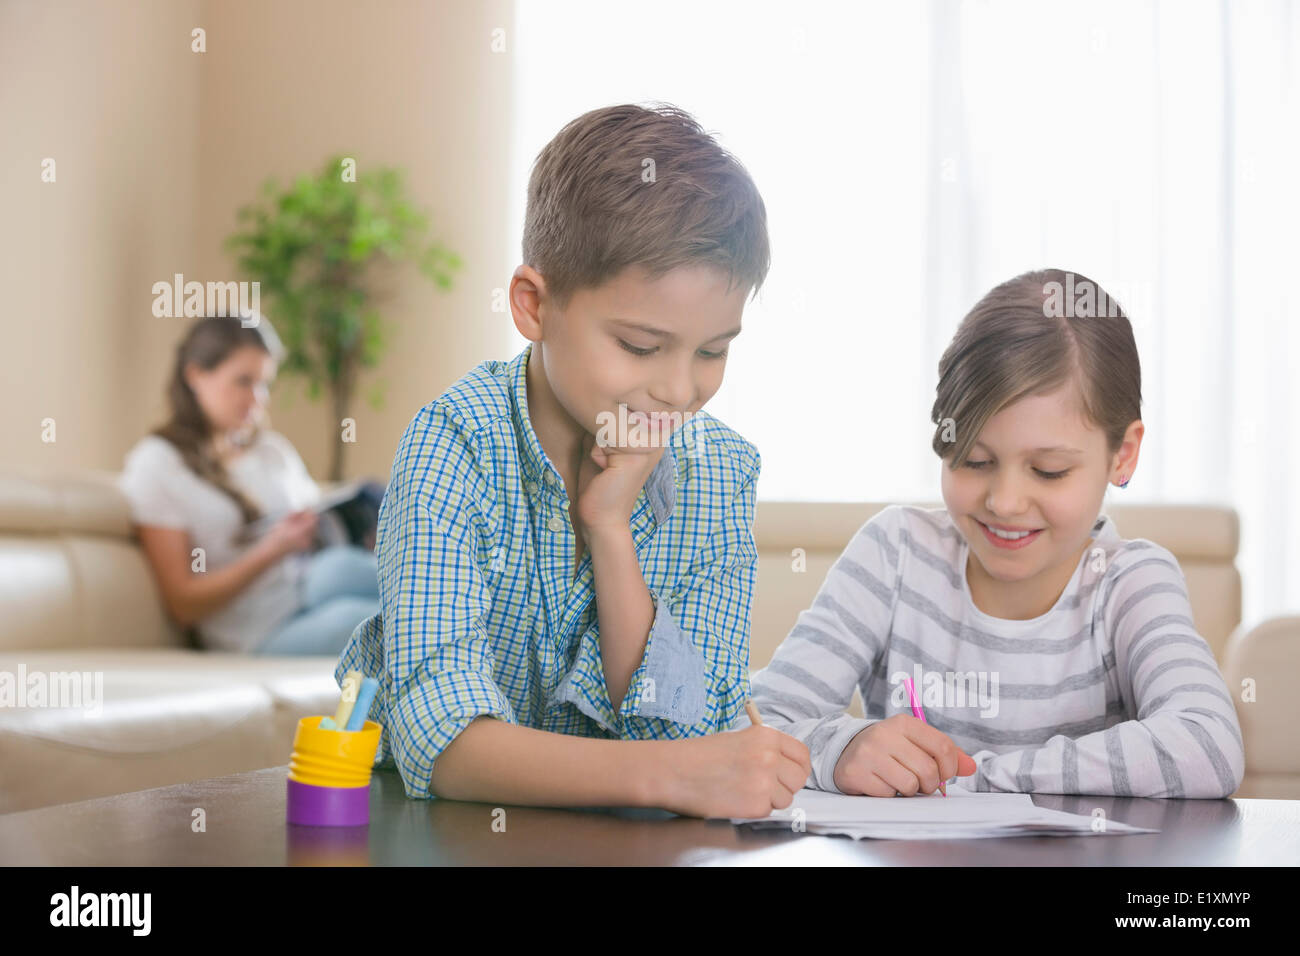 Siblings drawing together at table with mother in background Stock Photo